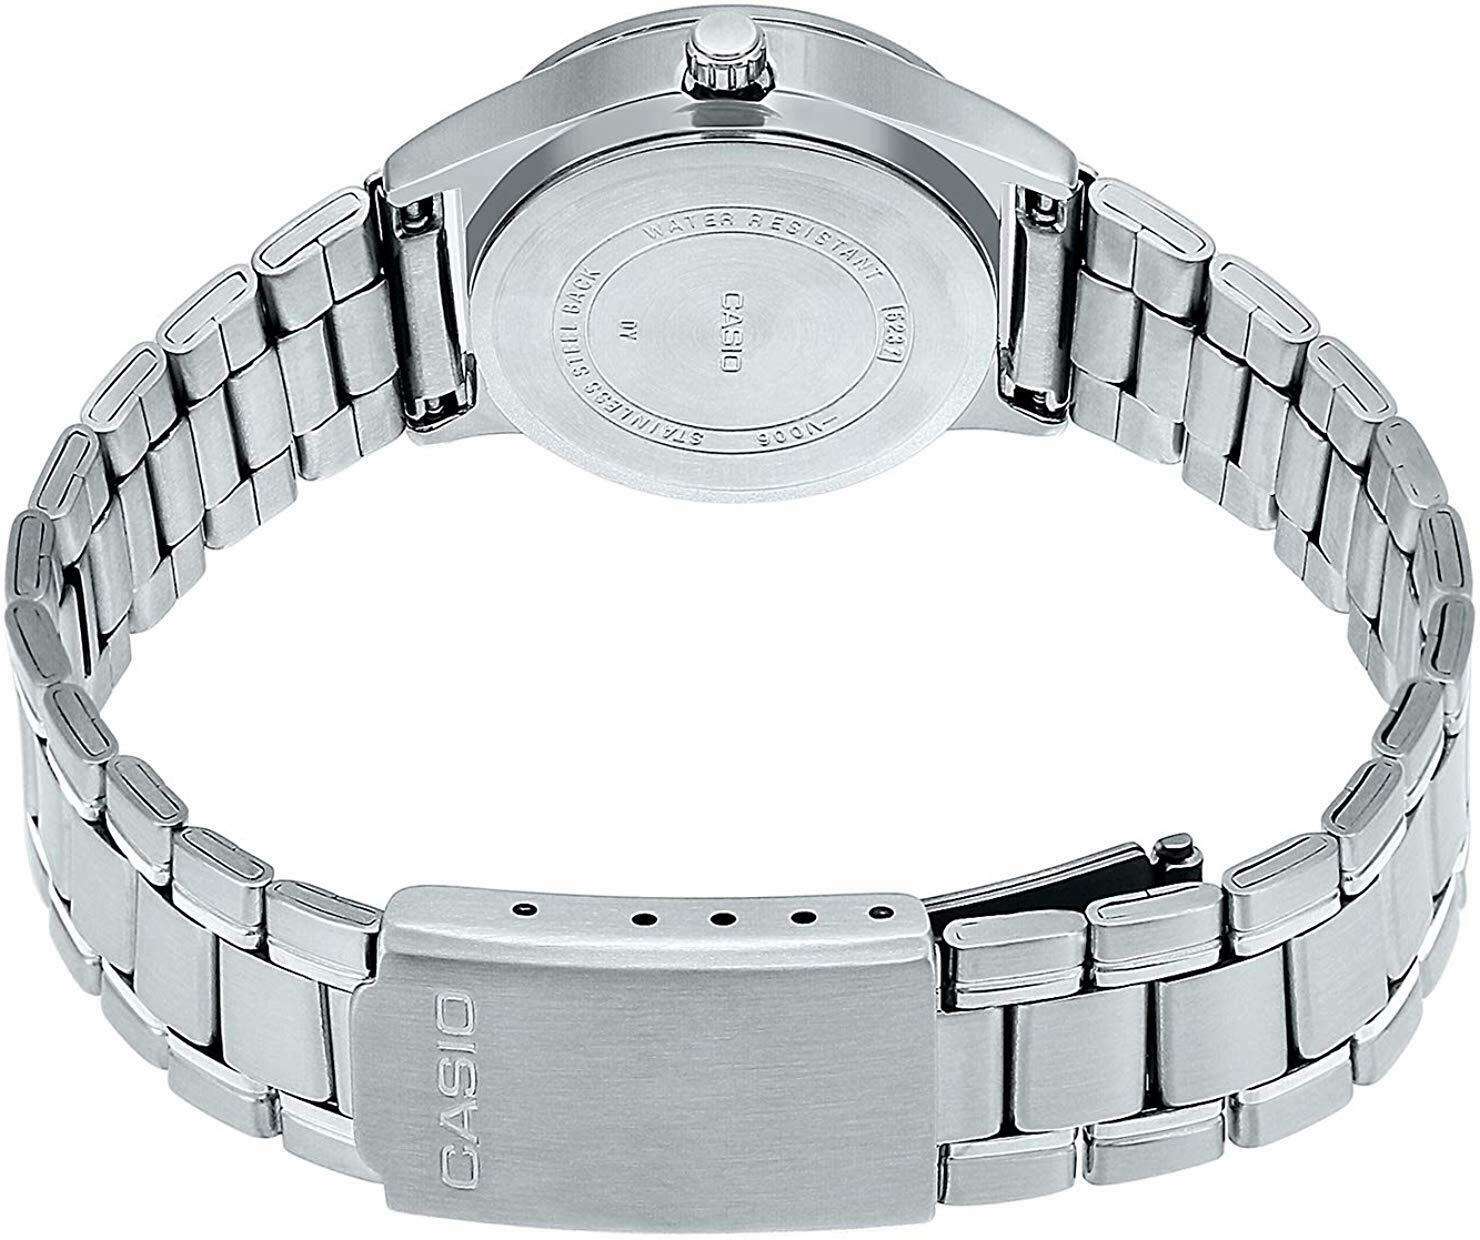 Casio LTP-V006D-7B2 Silver Stainless Watch for Women-Watch Portal Philippines